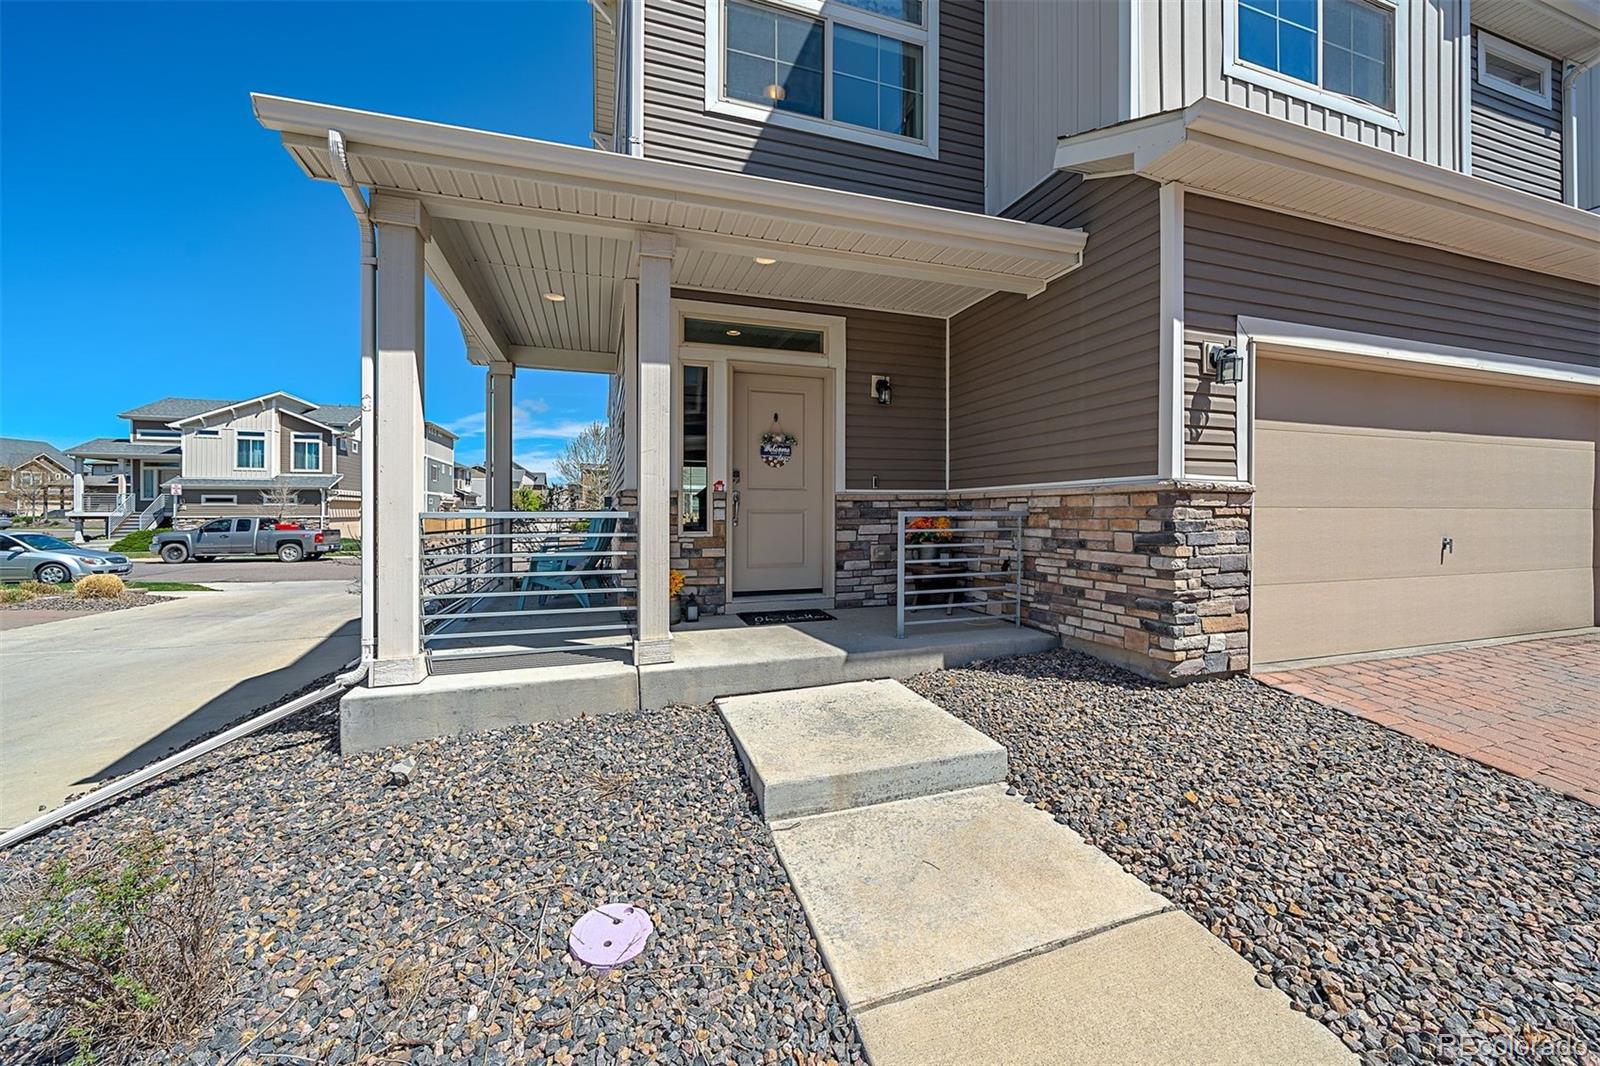 18182 E 104th Way, commerce city MLS: 5887218 Beds: 3 Baths: 3 Price: $475,000